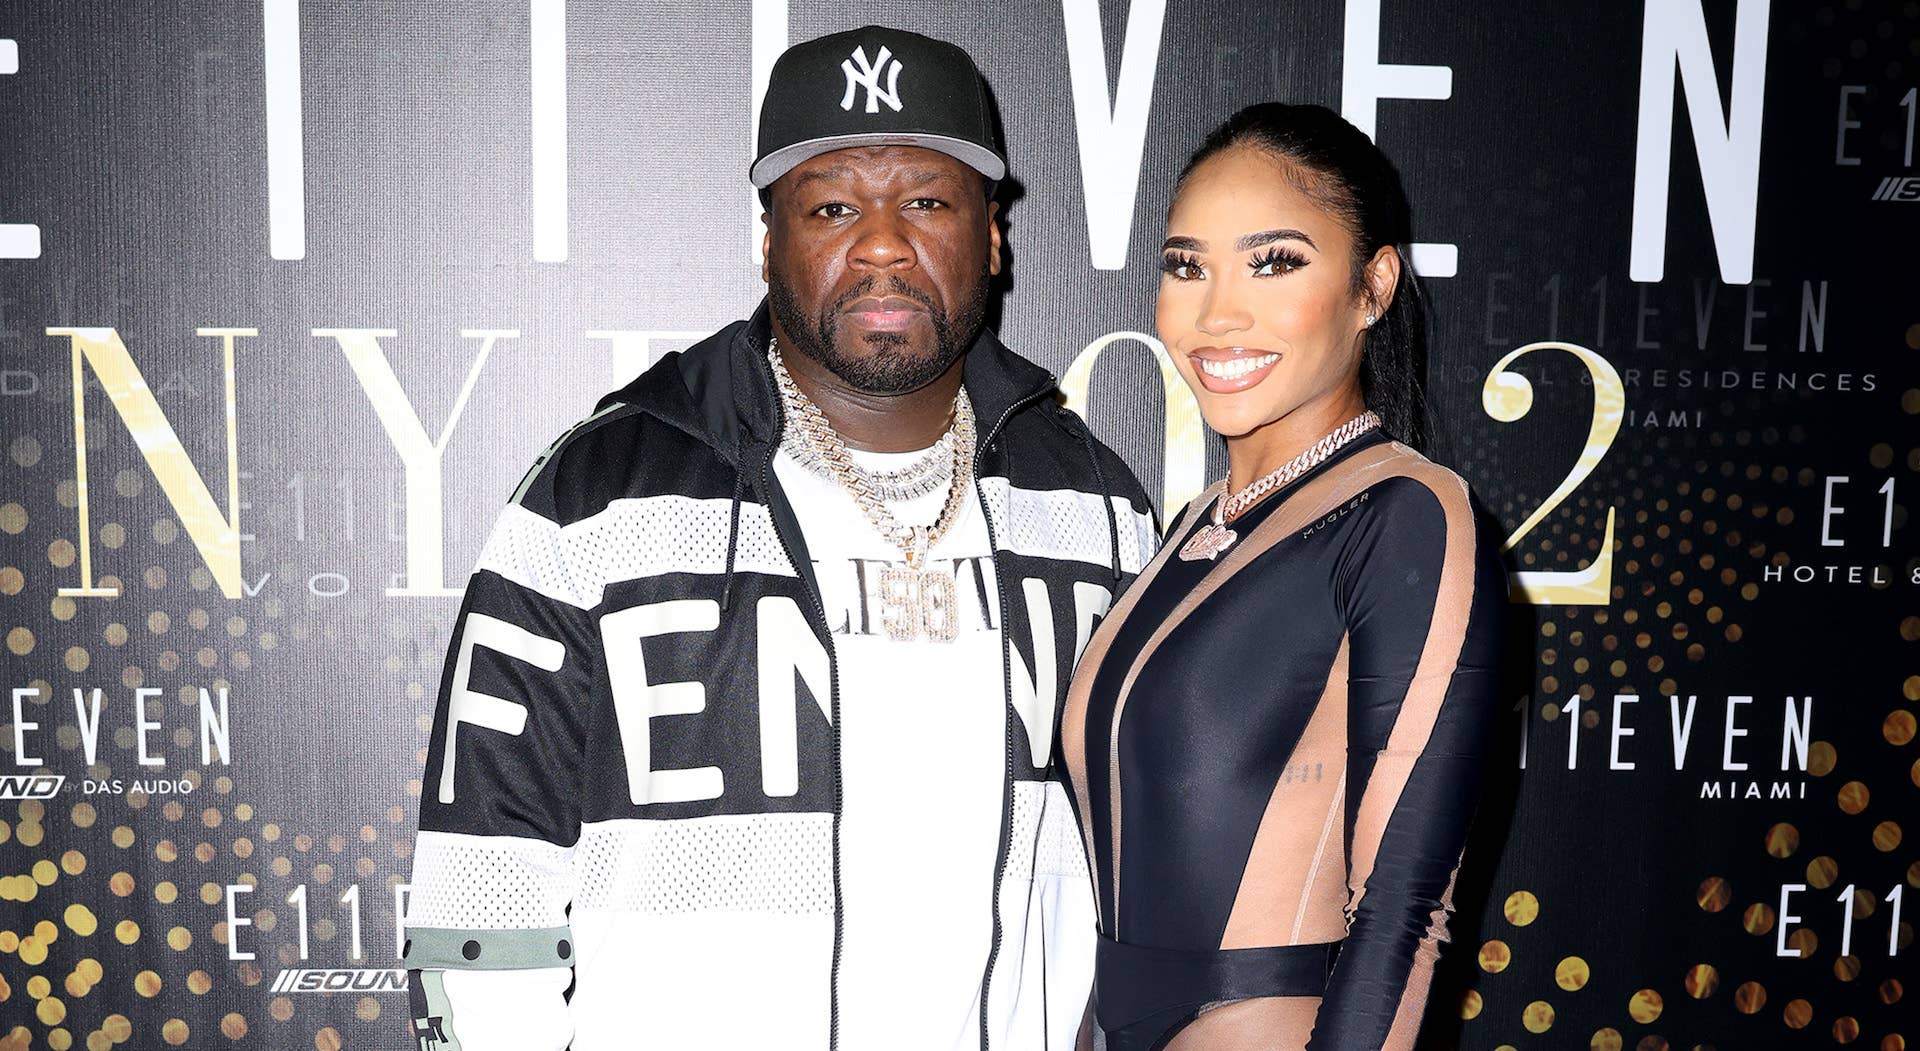 50 Cent and Cuban Link attend E11EVEN event